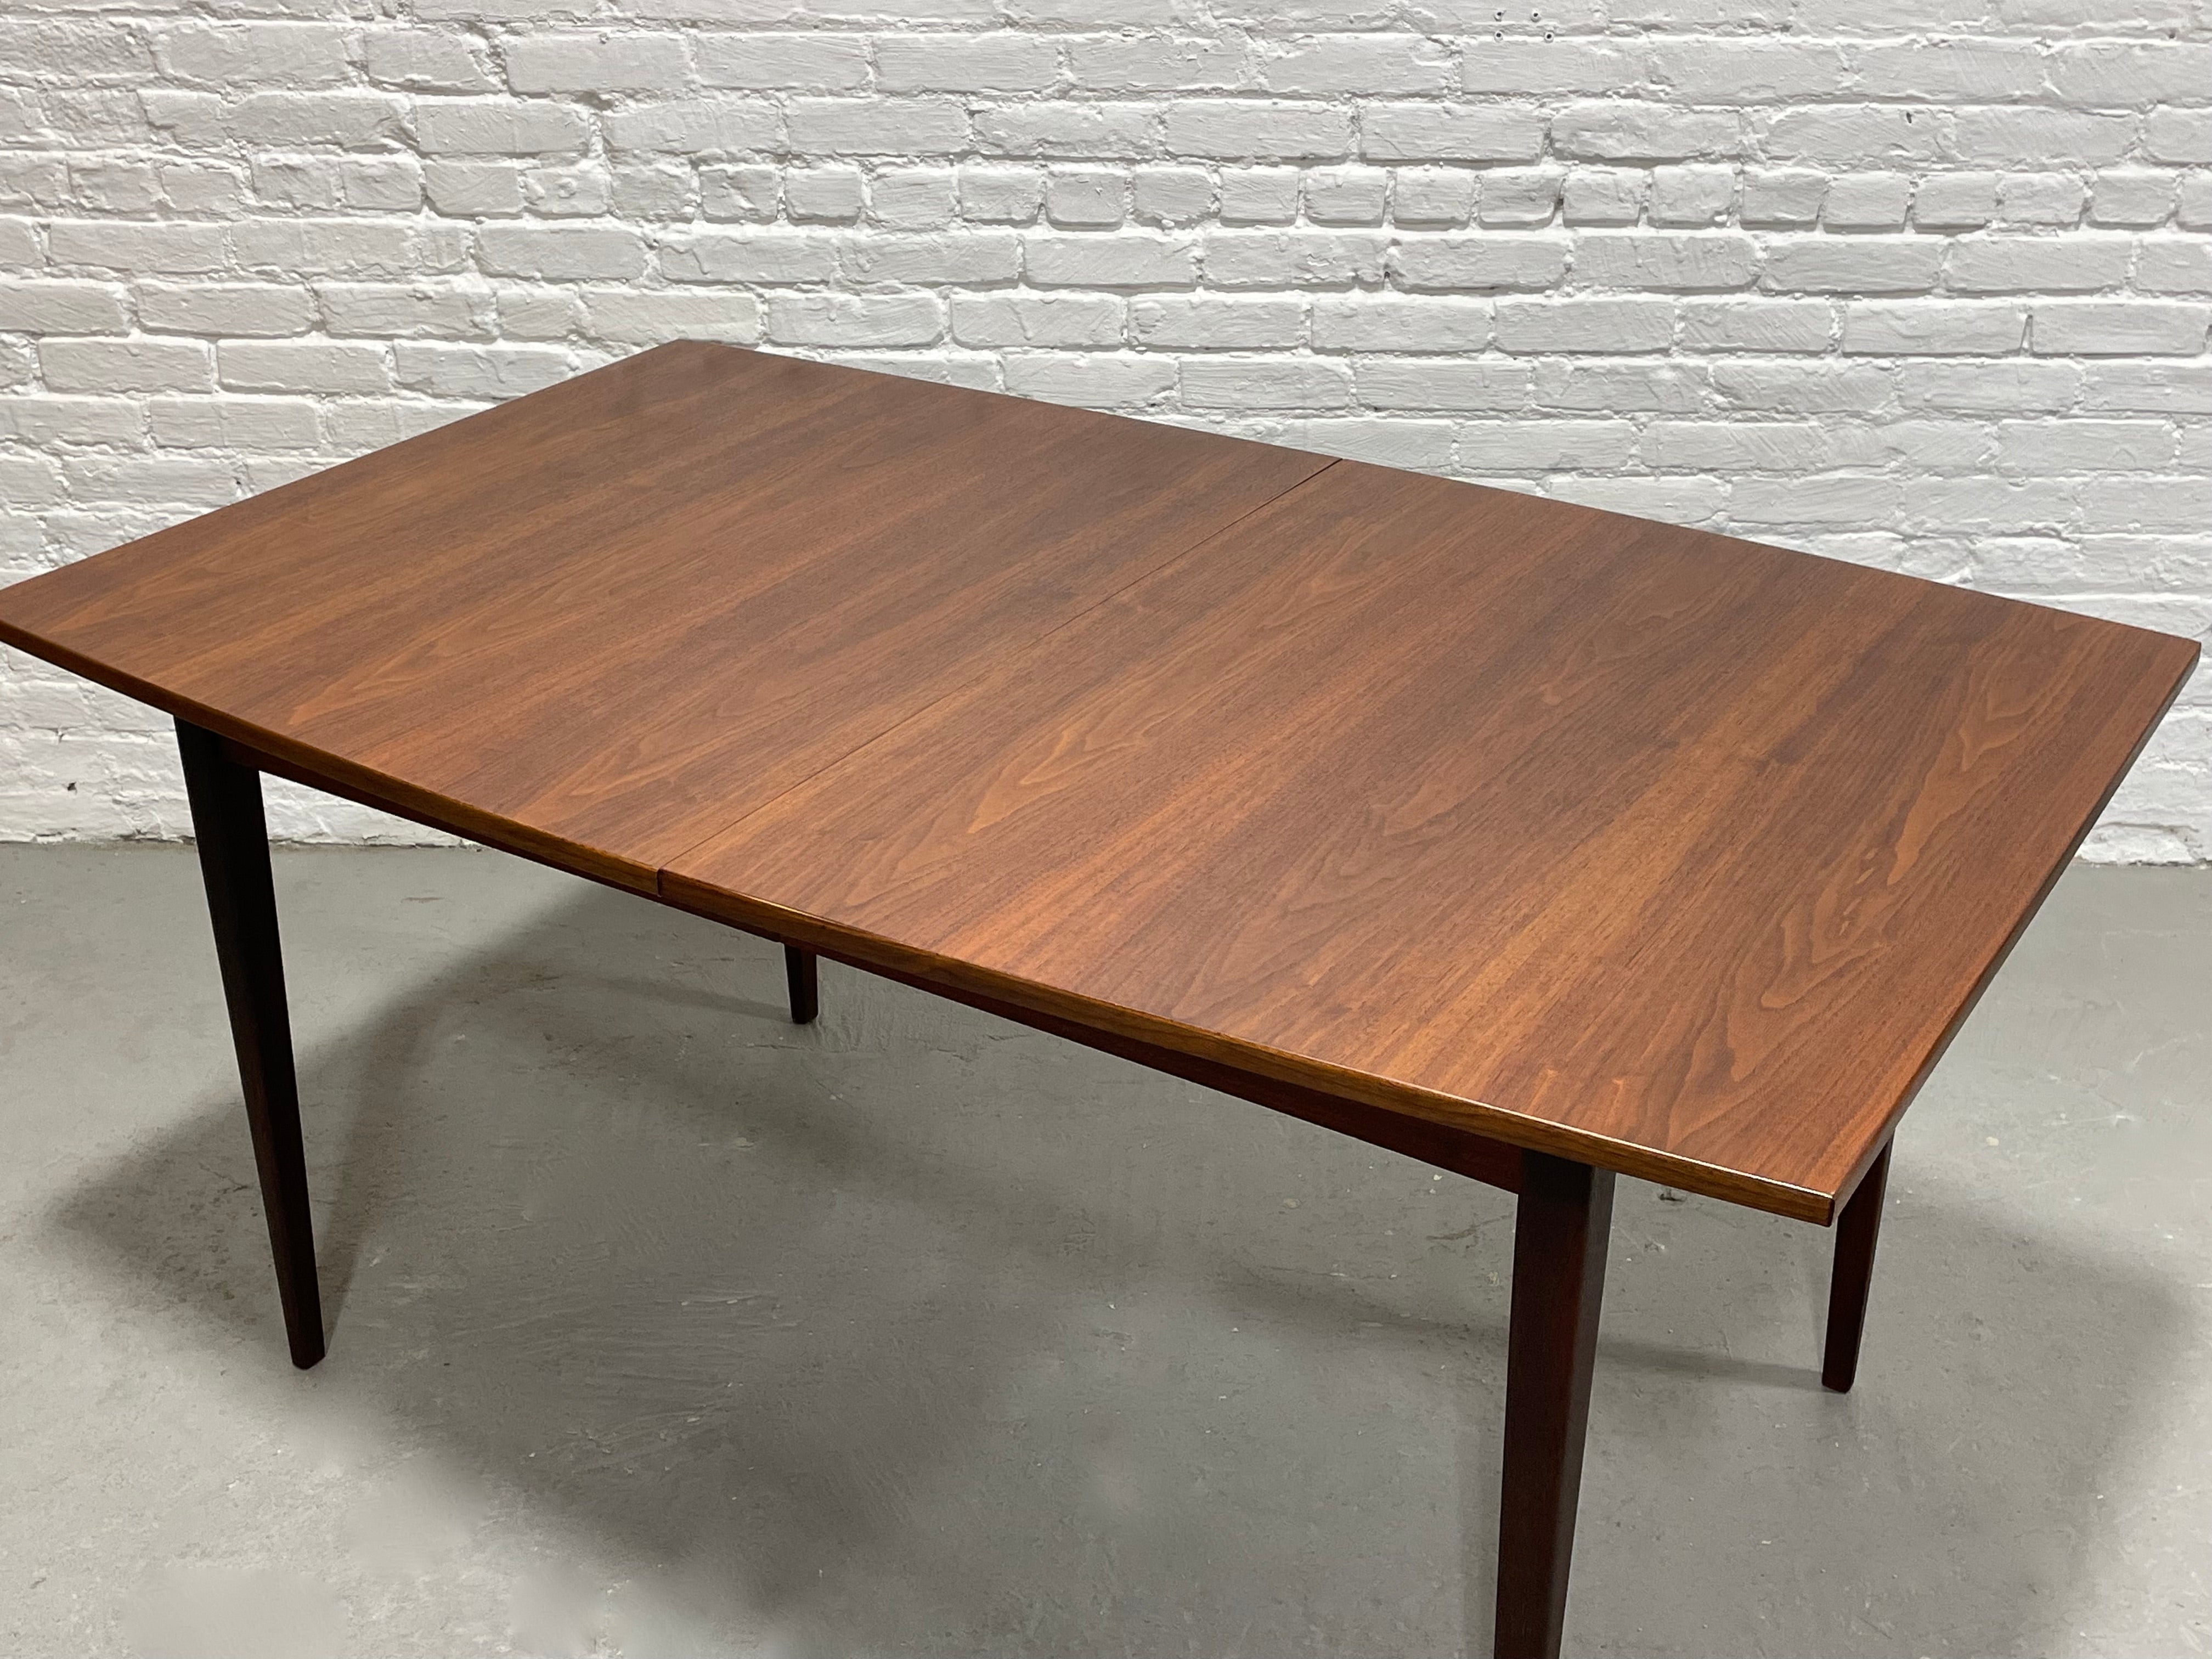 Perfect Size Mid Century Modern WALNUT DINING TABLE, c. 1960's